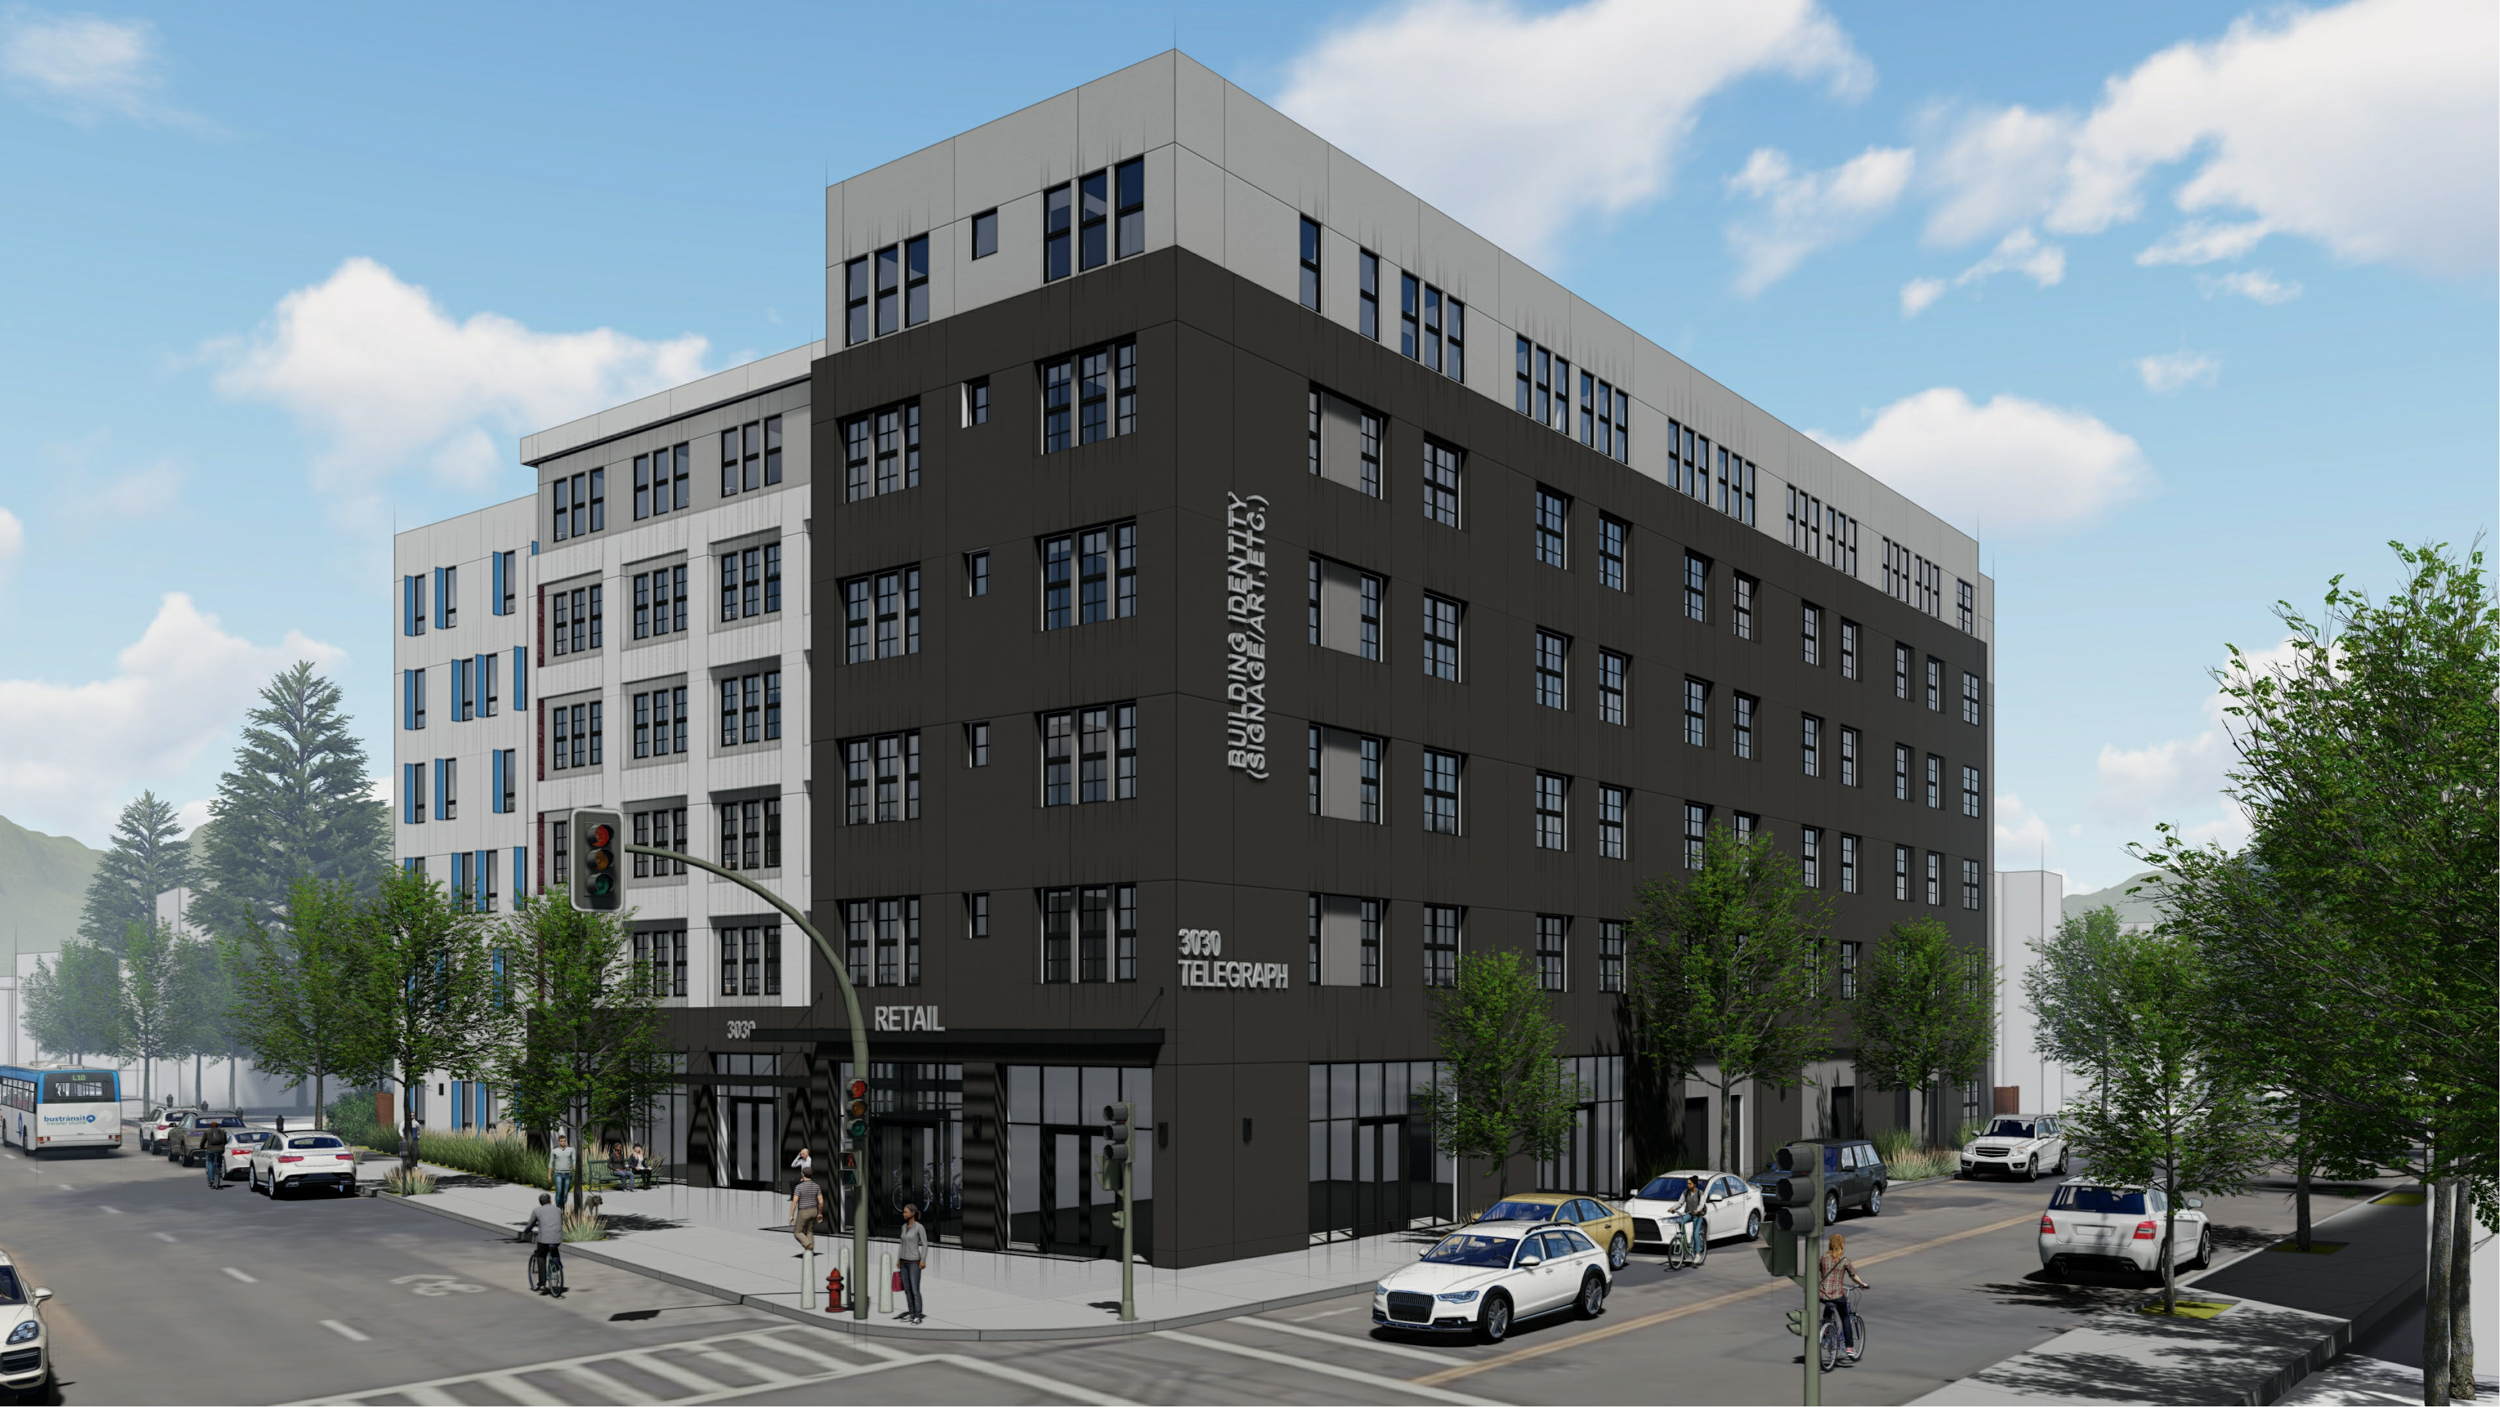 3030 Telegraph Avenue at the intersection of Telegraph and Webster Street, rendering by Left Coast Architecture